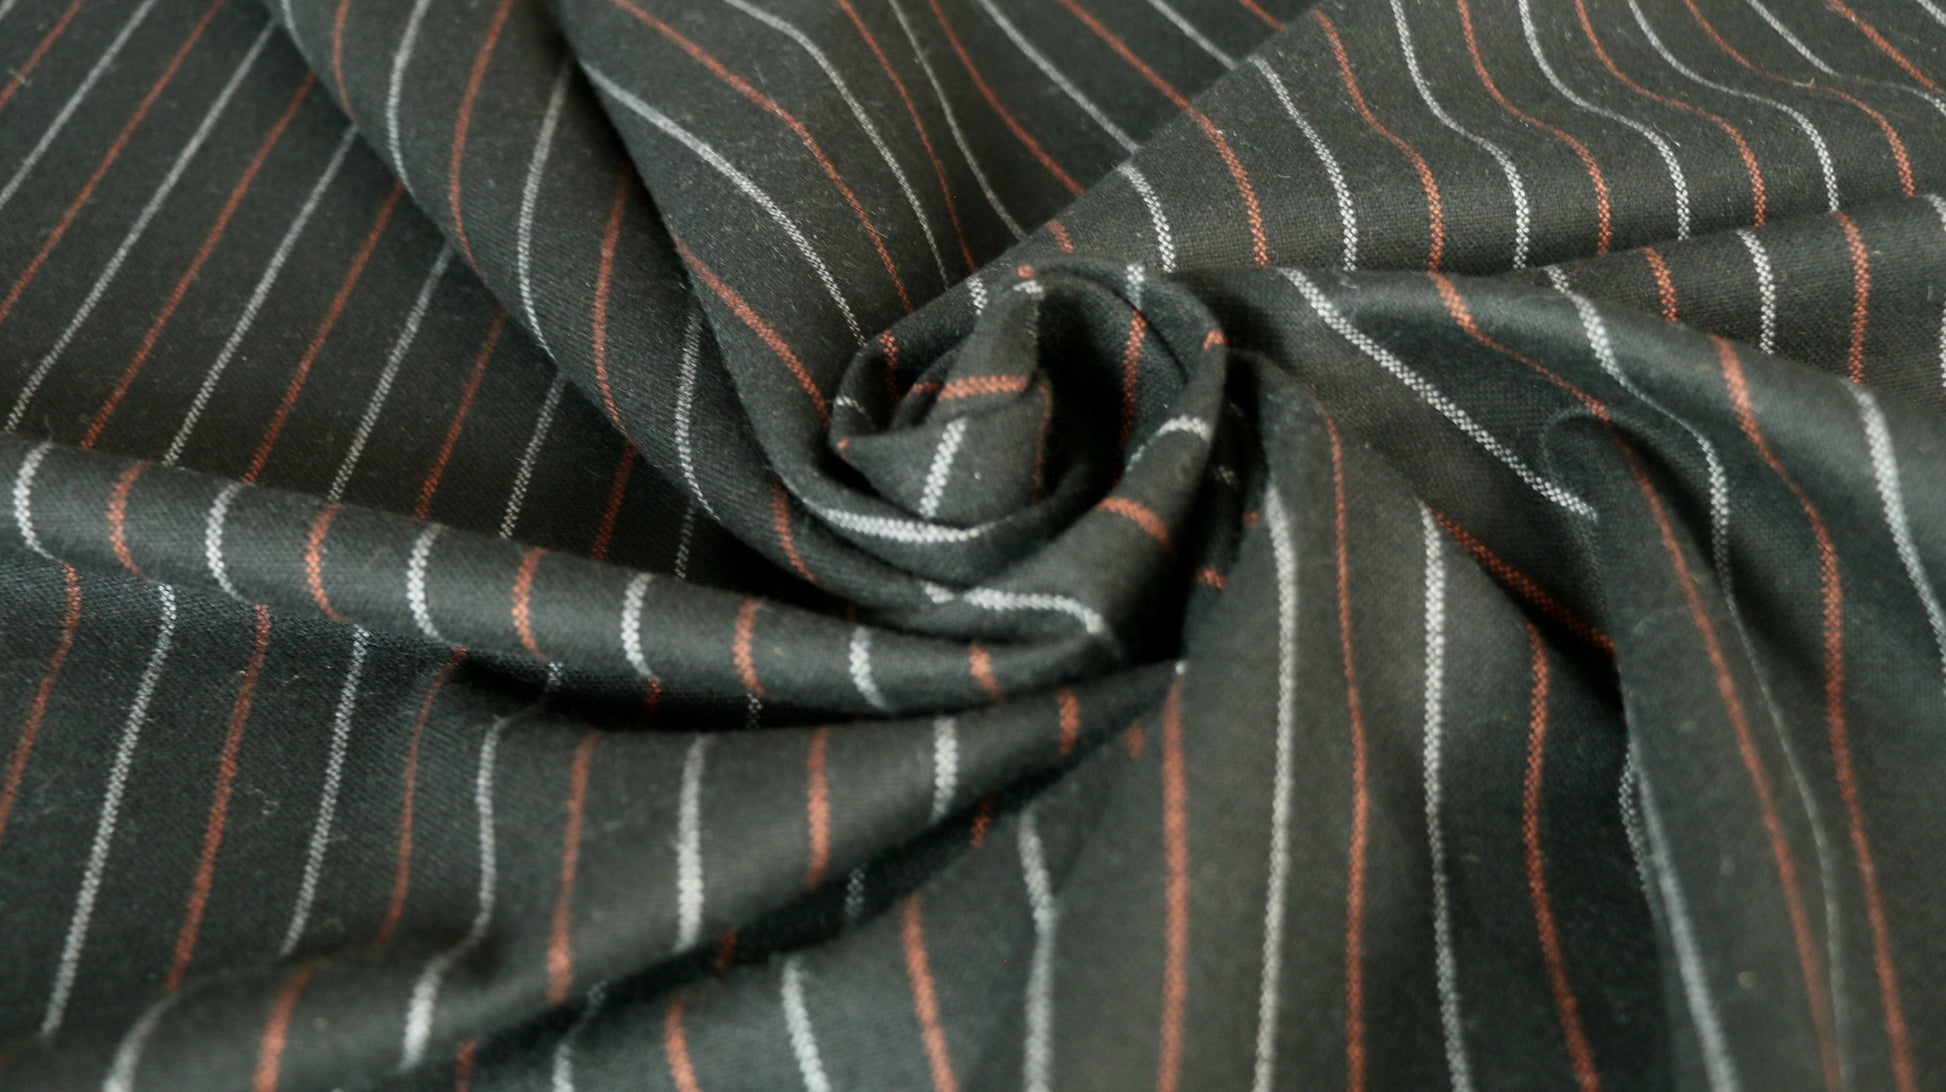 wool-blend-wool-voltaire-fabric-black-burned-orange-and-grey-stripe-design-clothcontrol